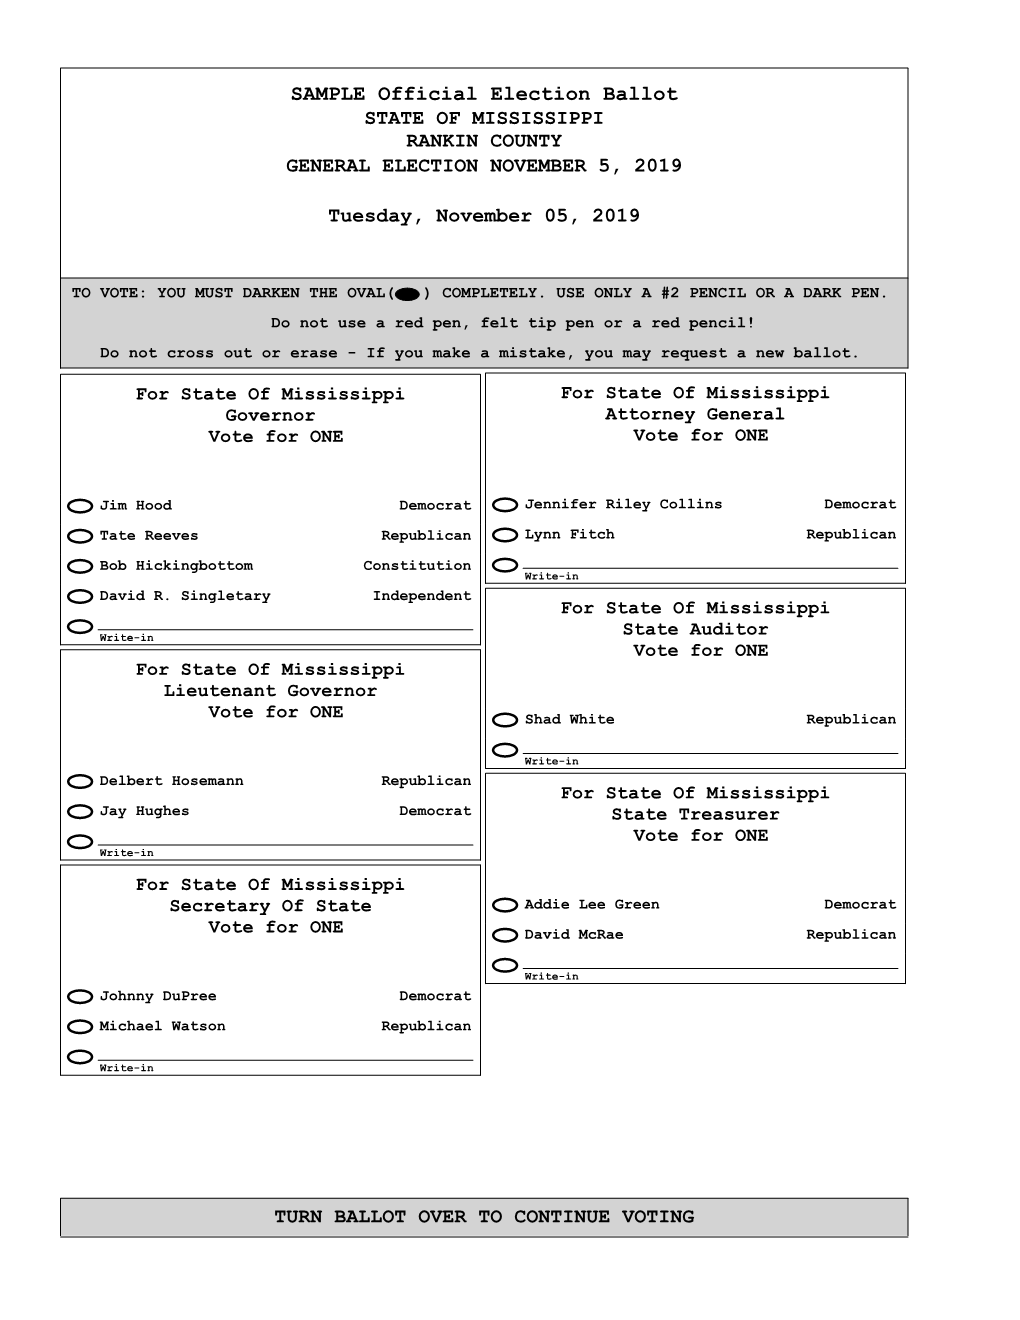 SAMPLE Official Election Ballot STATE of MISSISSIPPI RANKIN COUNTY GENERAL ELECTION NOVEMBER 5, 2019